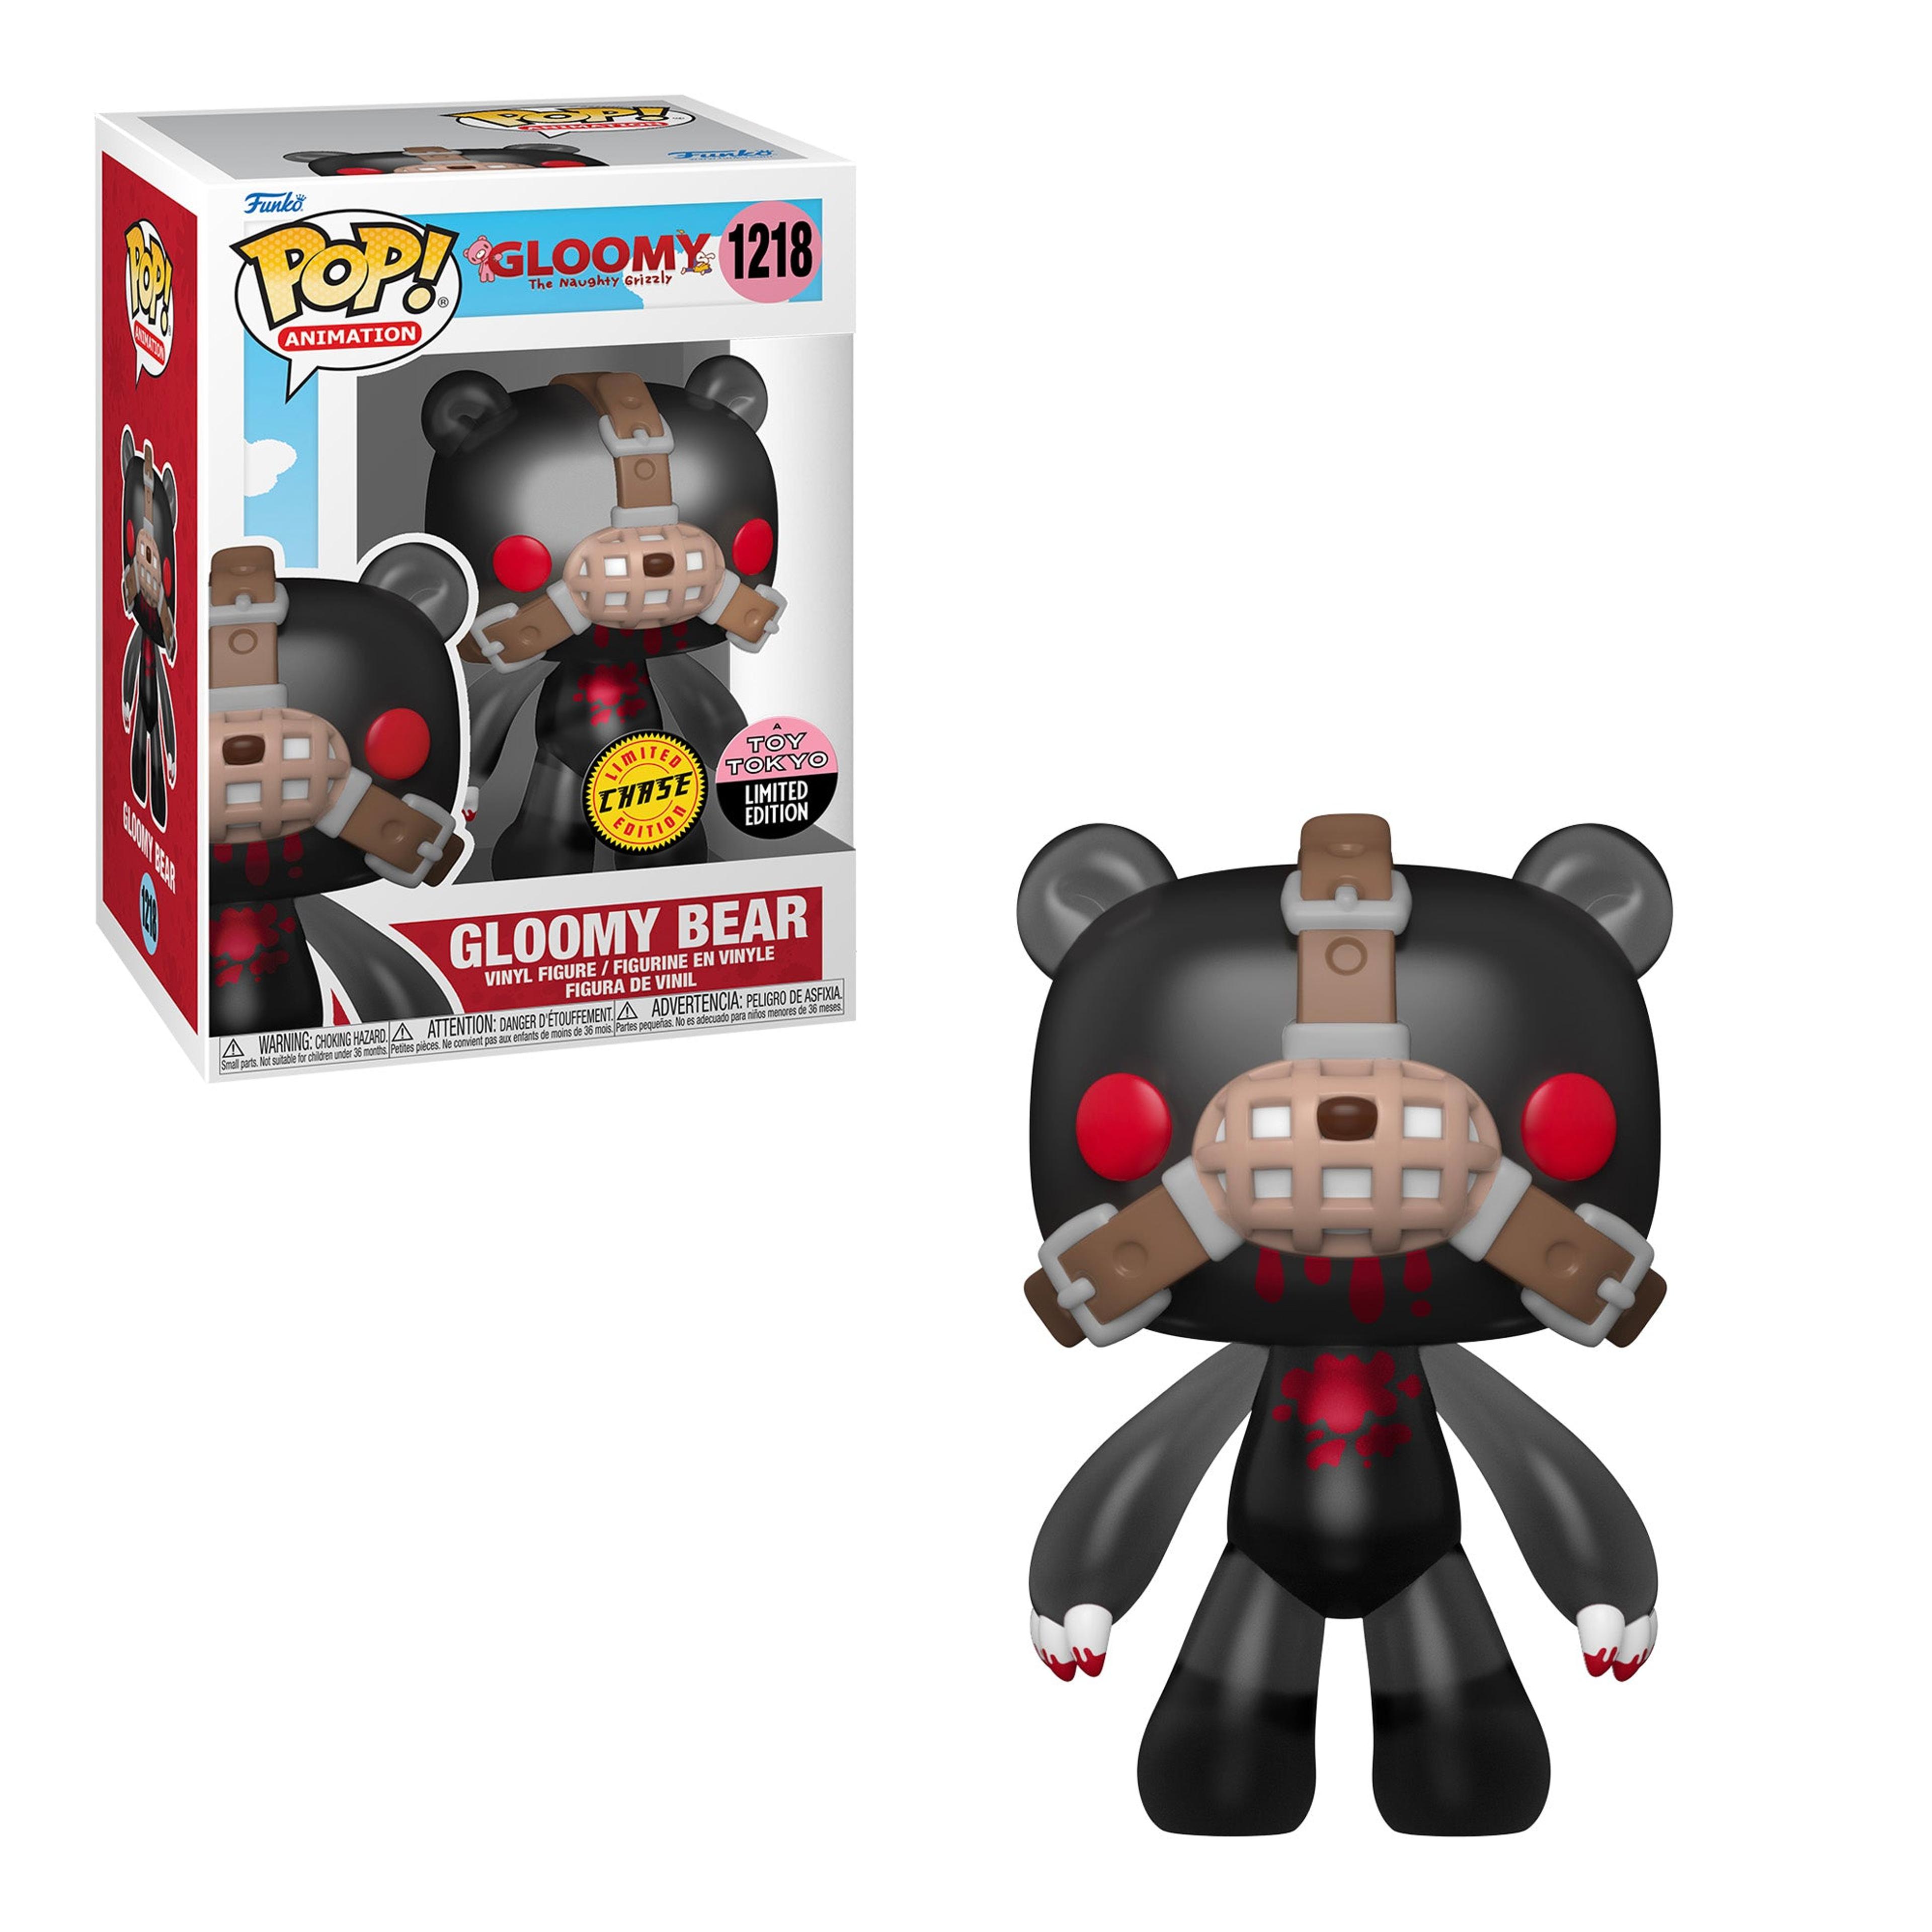 Alternate View 1 of Funko Pop! Animation: Gloomy Bear #1218 (1 in 6 Chance of Chase)